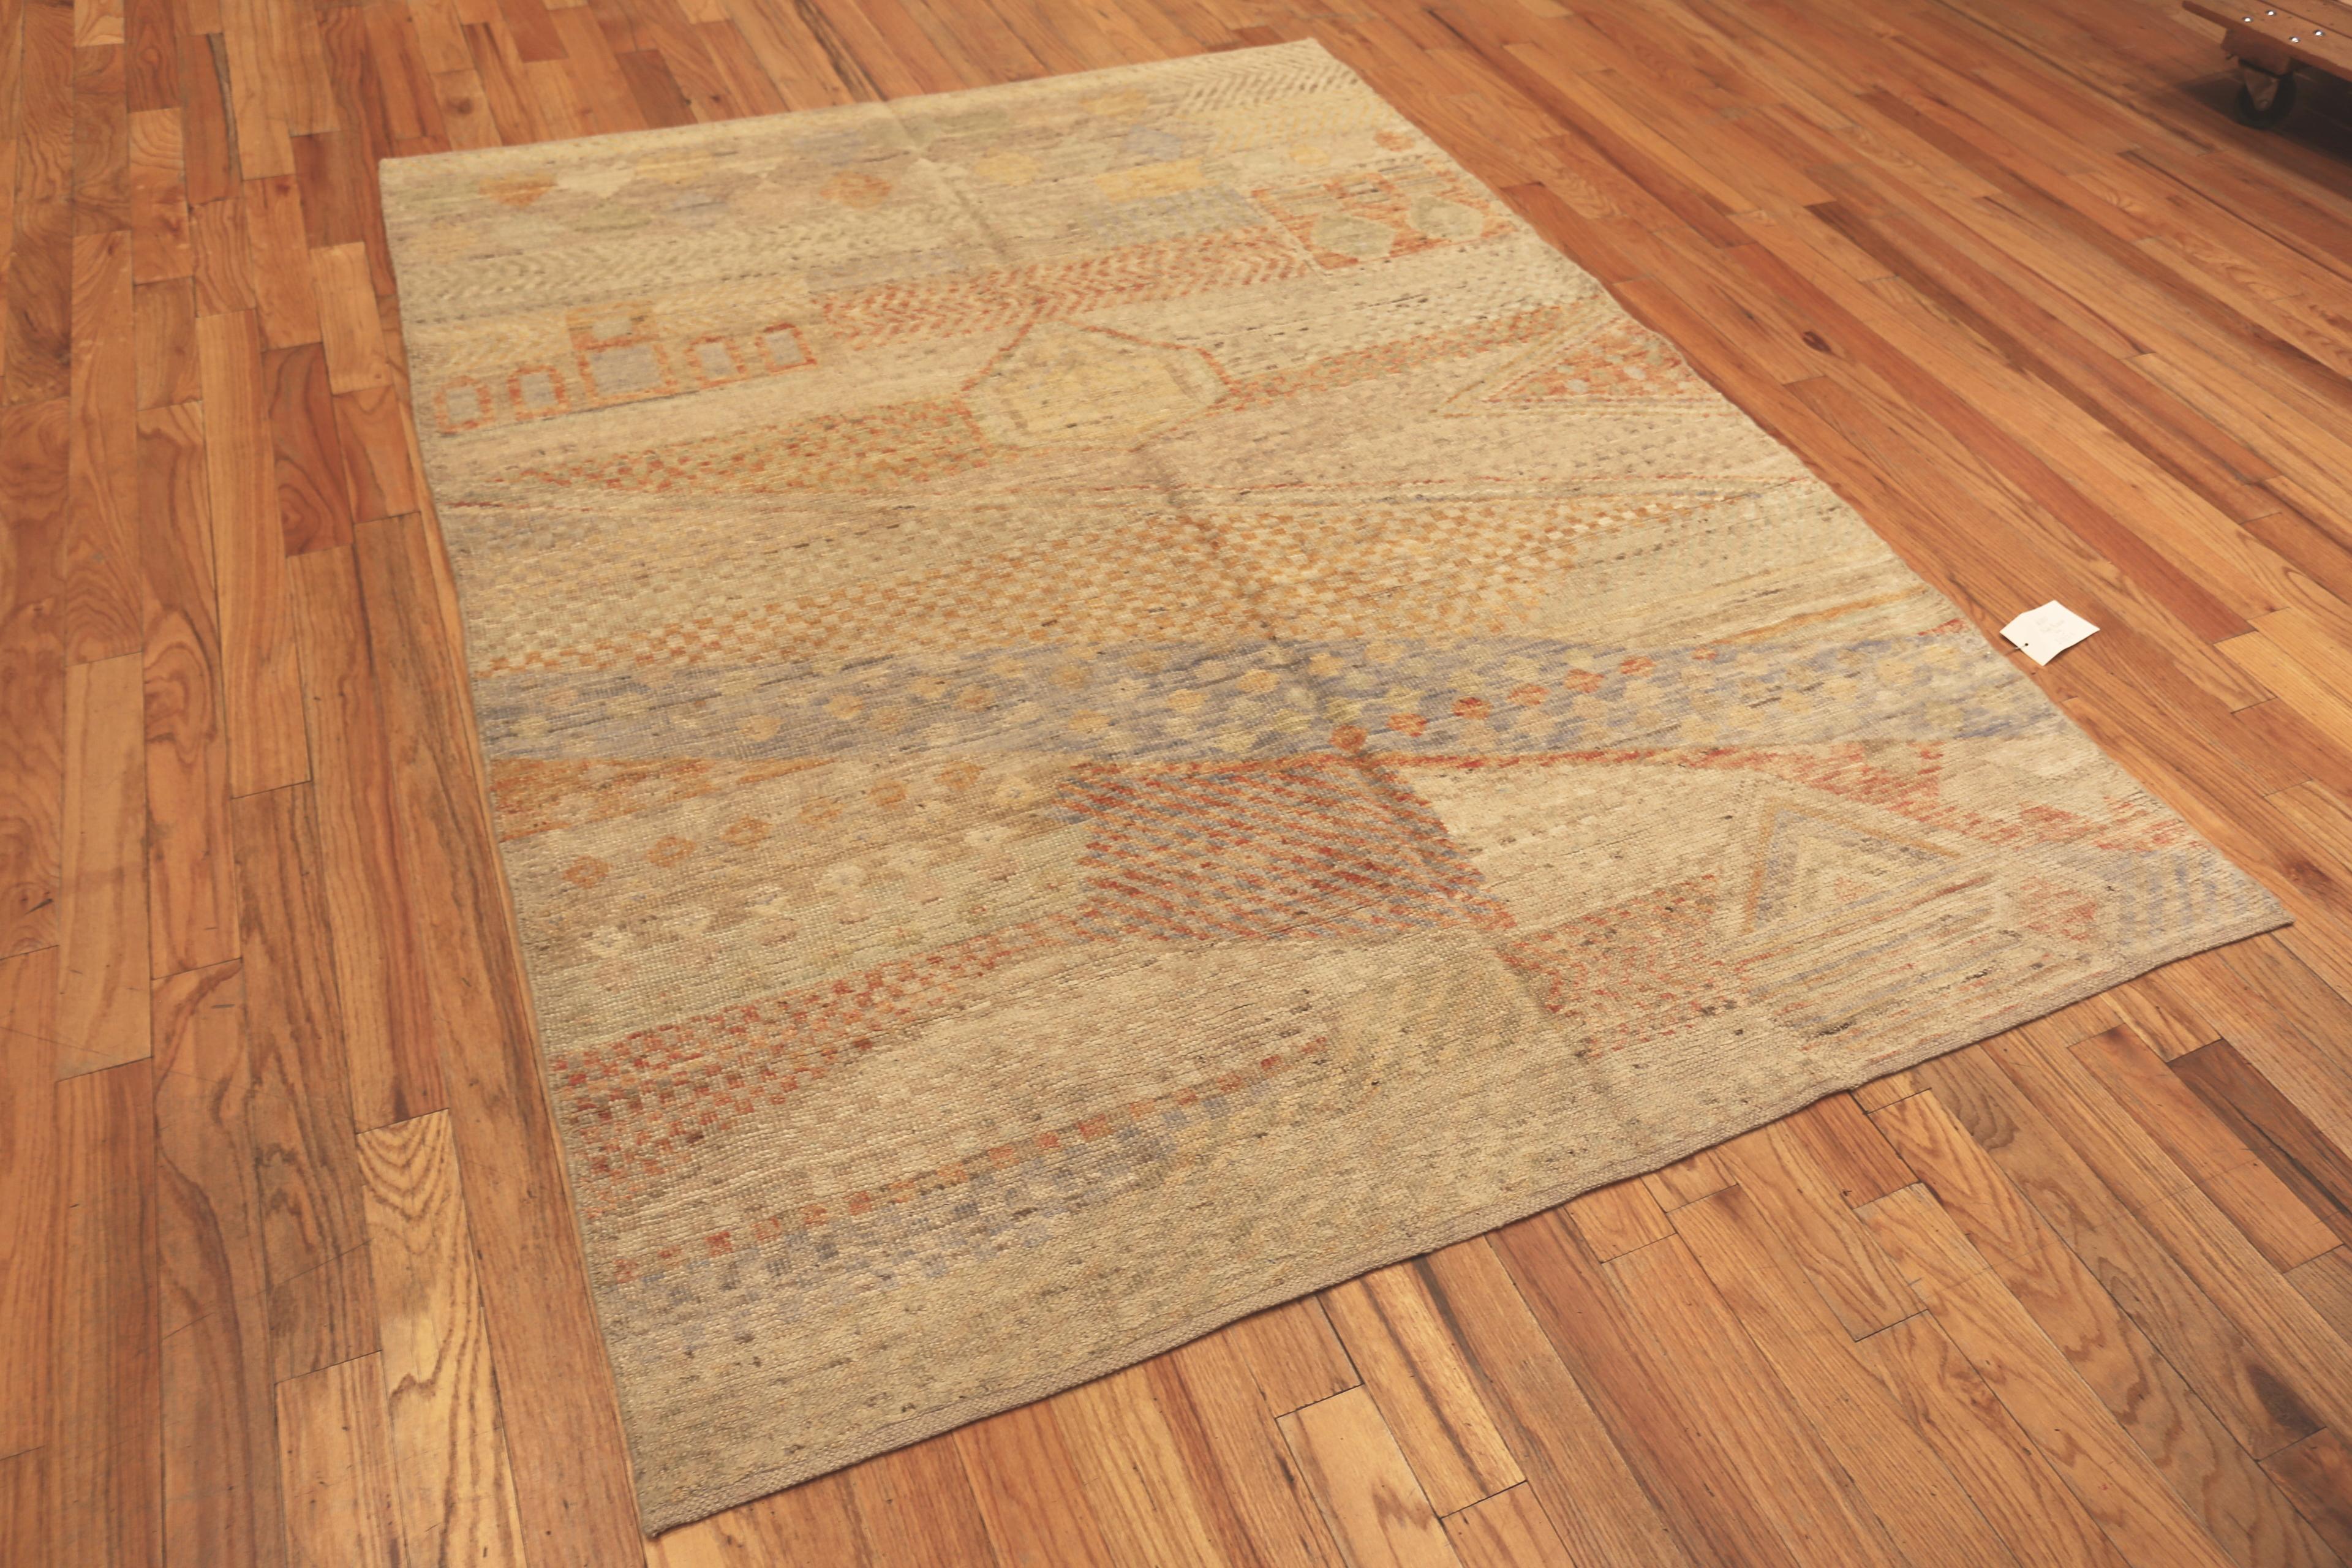 Rust Tones Modern Moroccan Rug, Country of Origin: Afghanistan. Circa date: Modern. Size: 5 ft 9 in x 7 ft 9 in (1.75 m x 2.36 m)